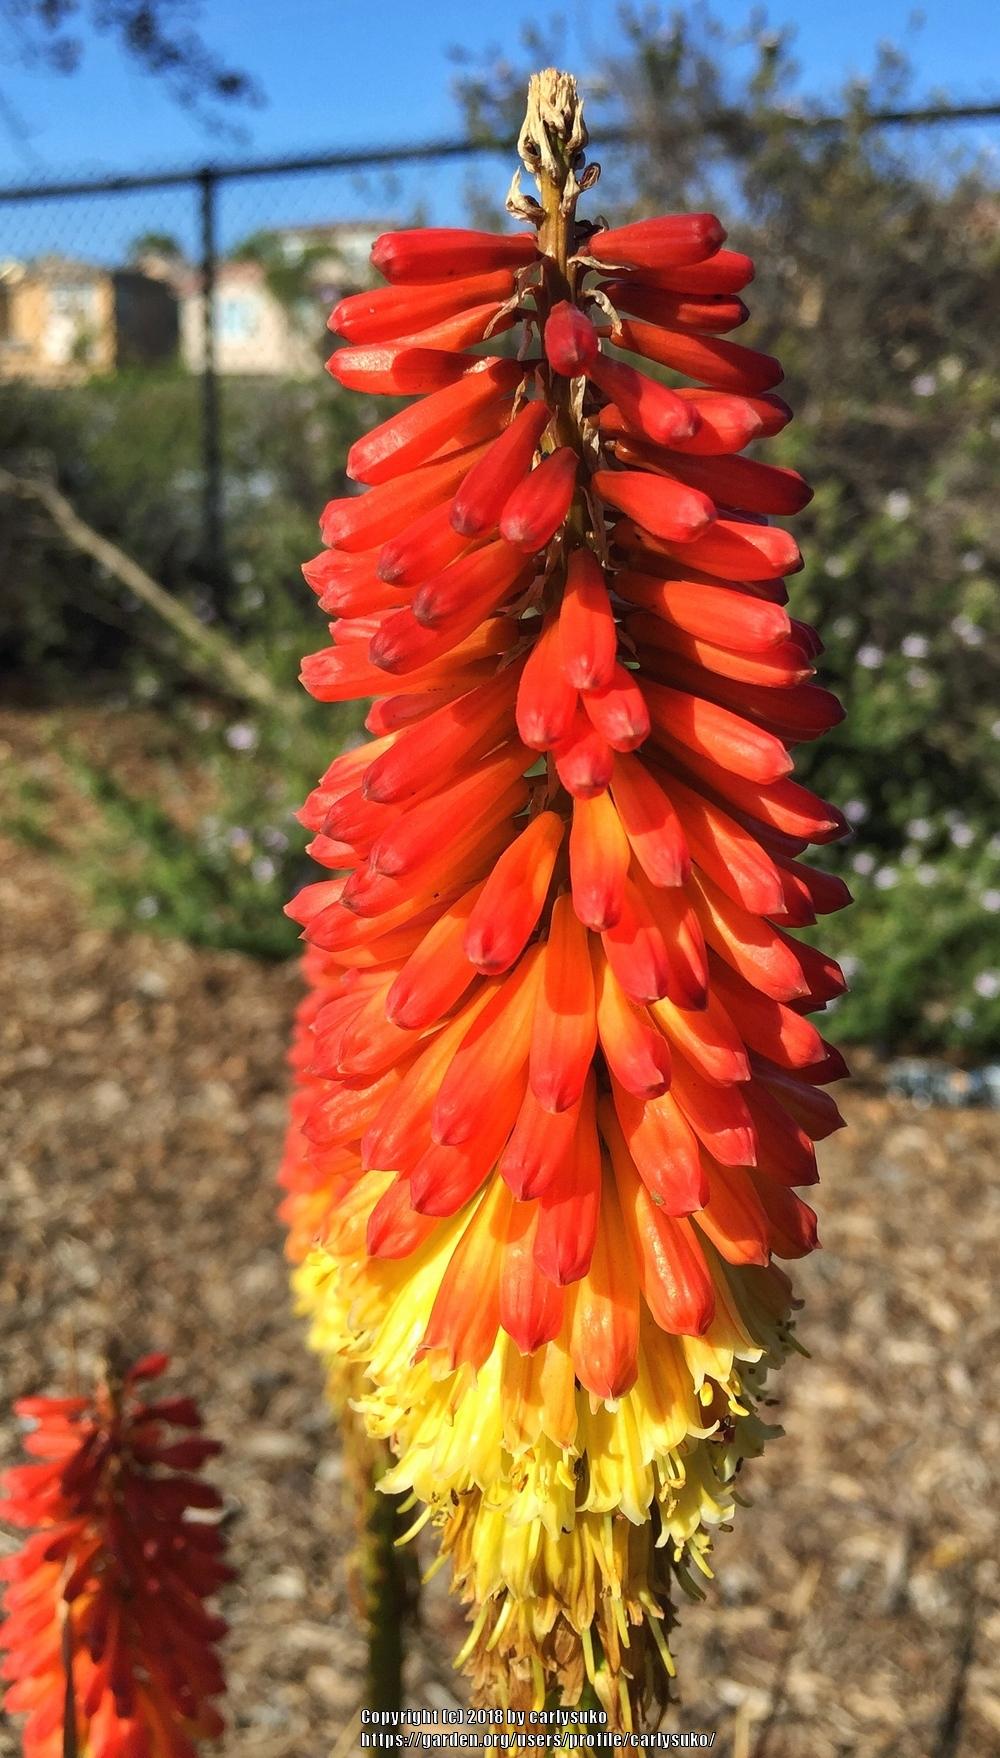 Photo of Torch Lilies (Kniphofia) uploaded by carlysuko